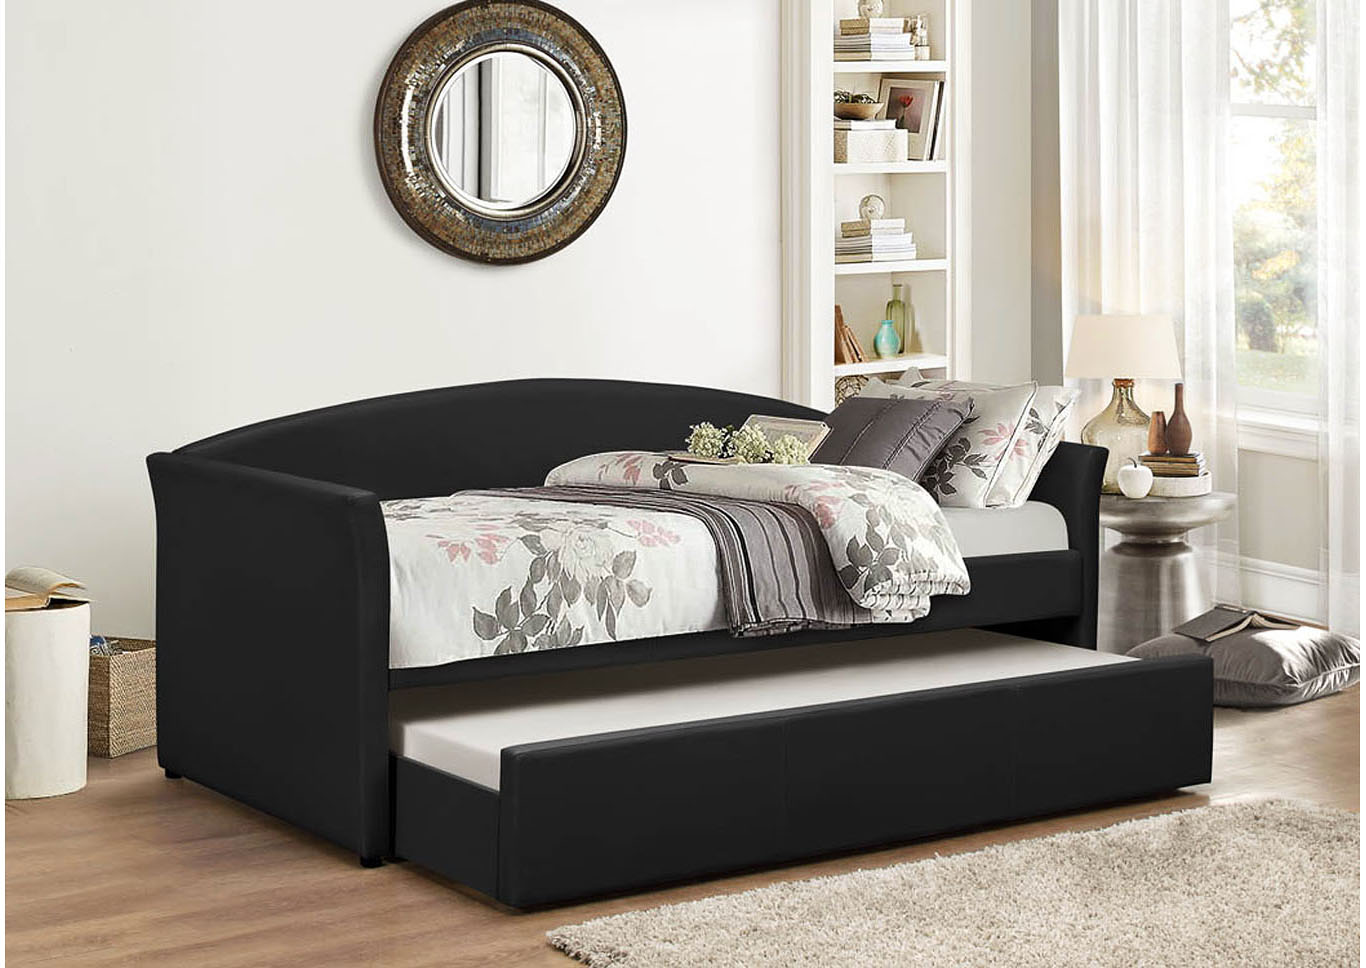 4420 Black Faux Leather Daybed With Trundle,Global Trading